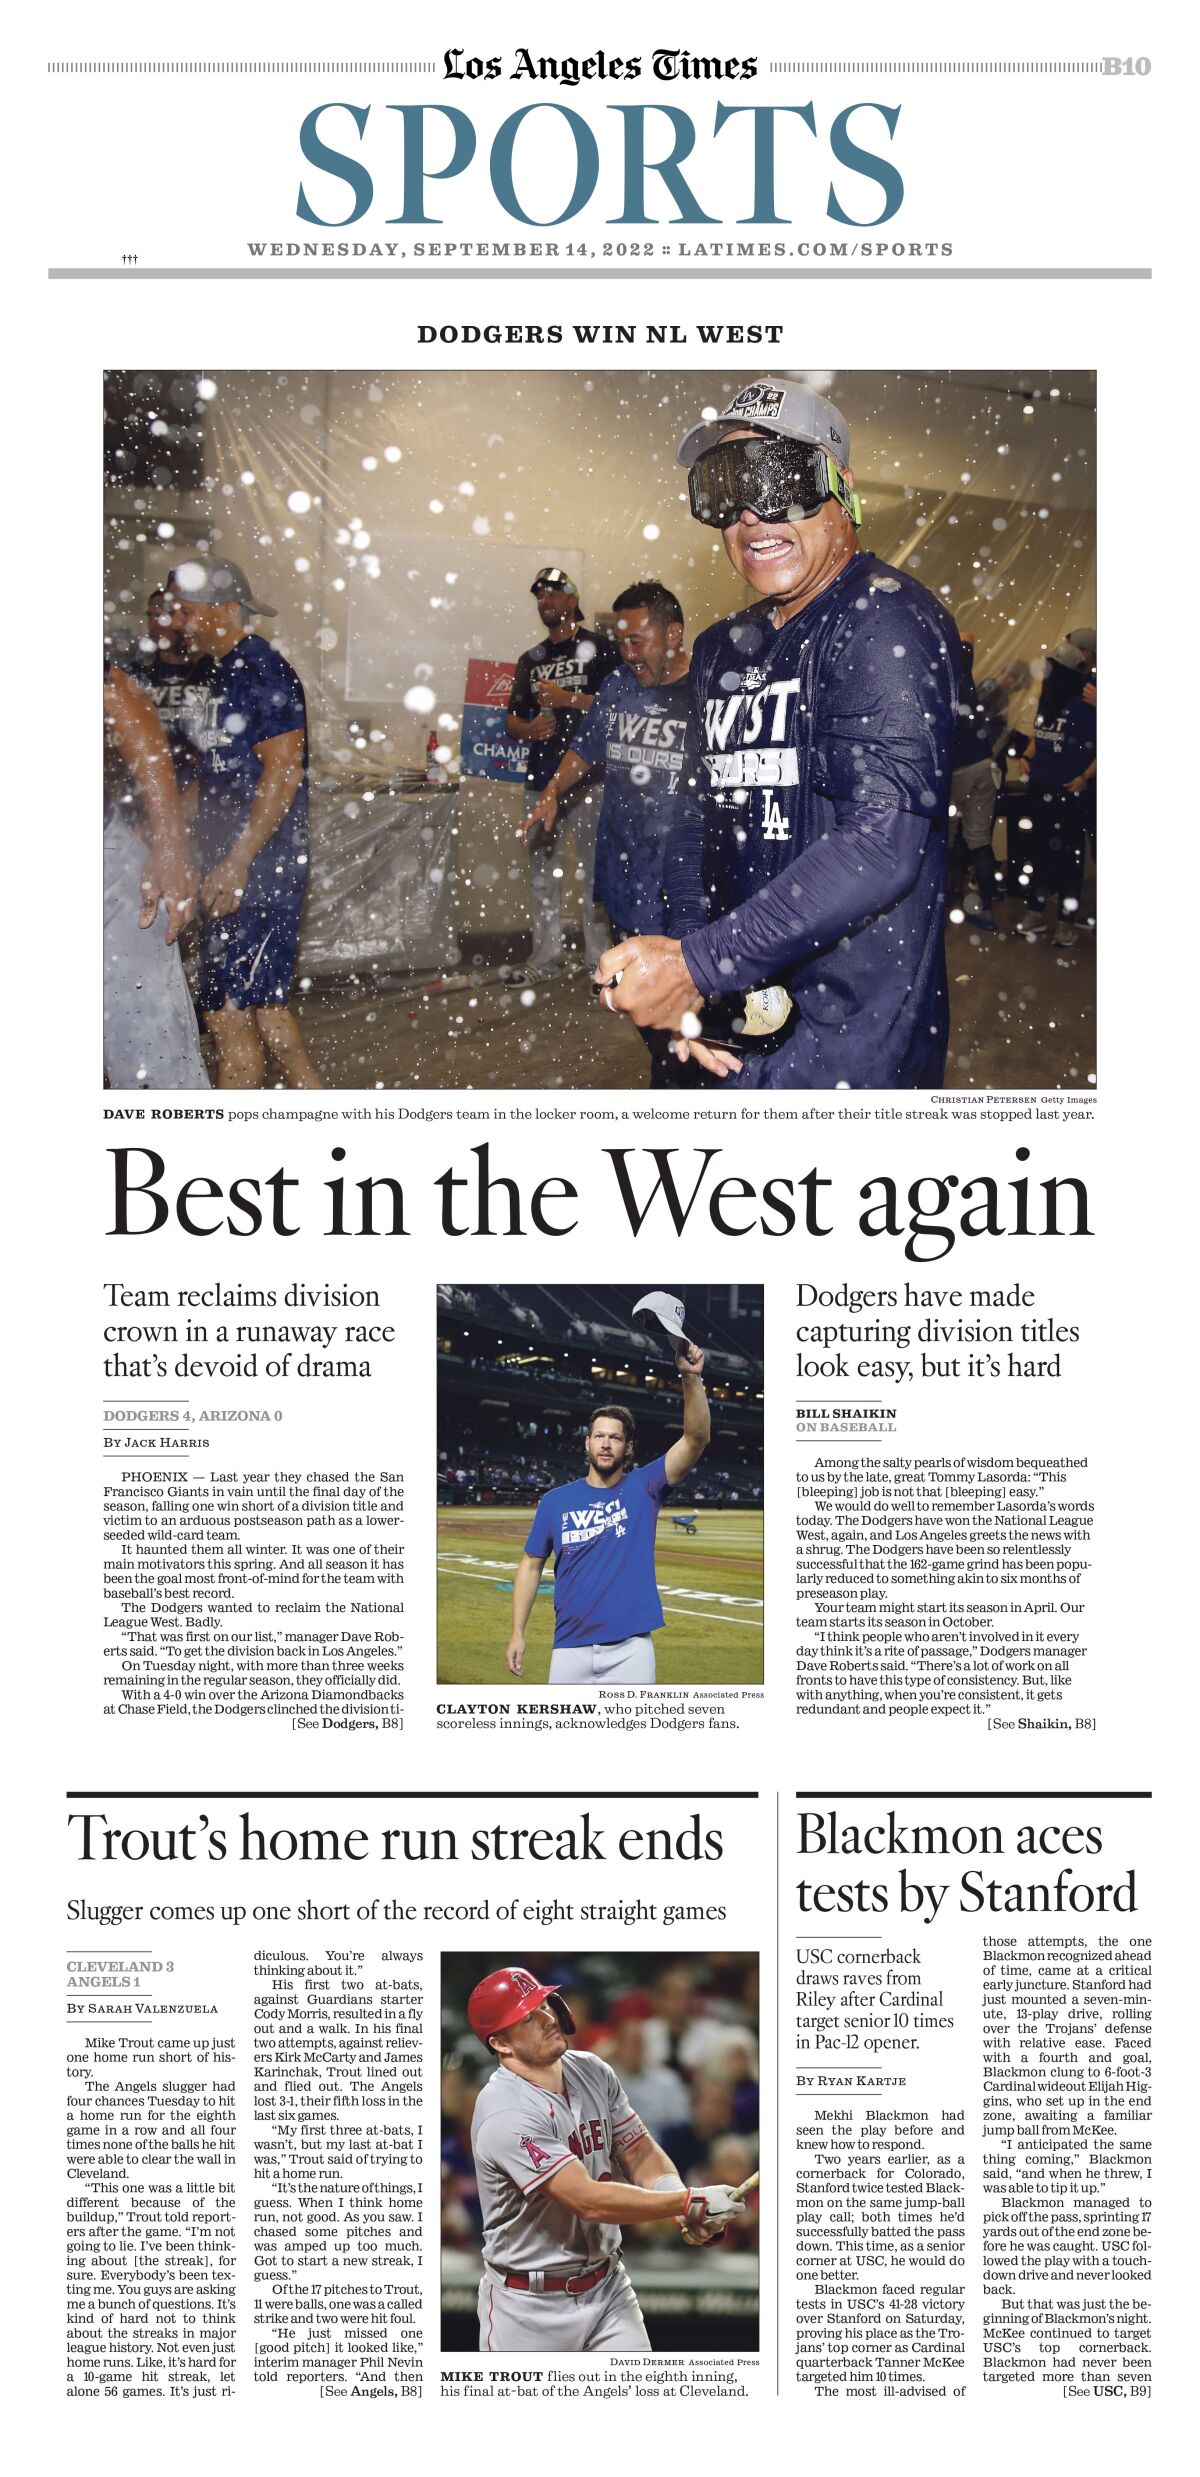 Los Angeles Times sports section cover on Sept. 14 showing the Dodgers' NL West title celebration